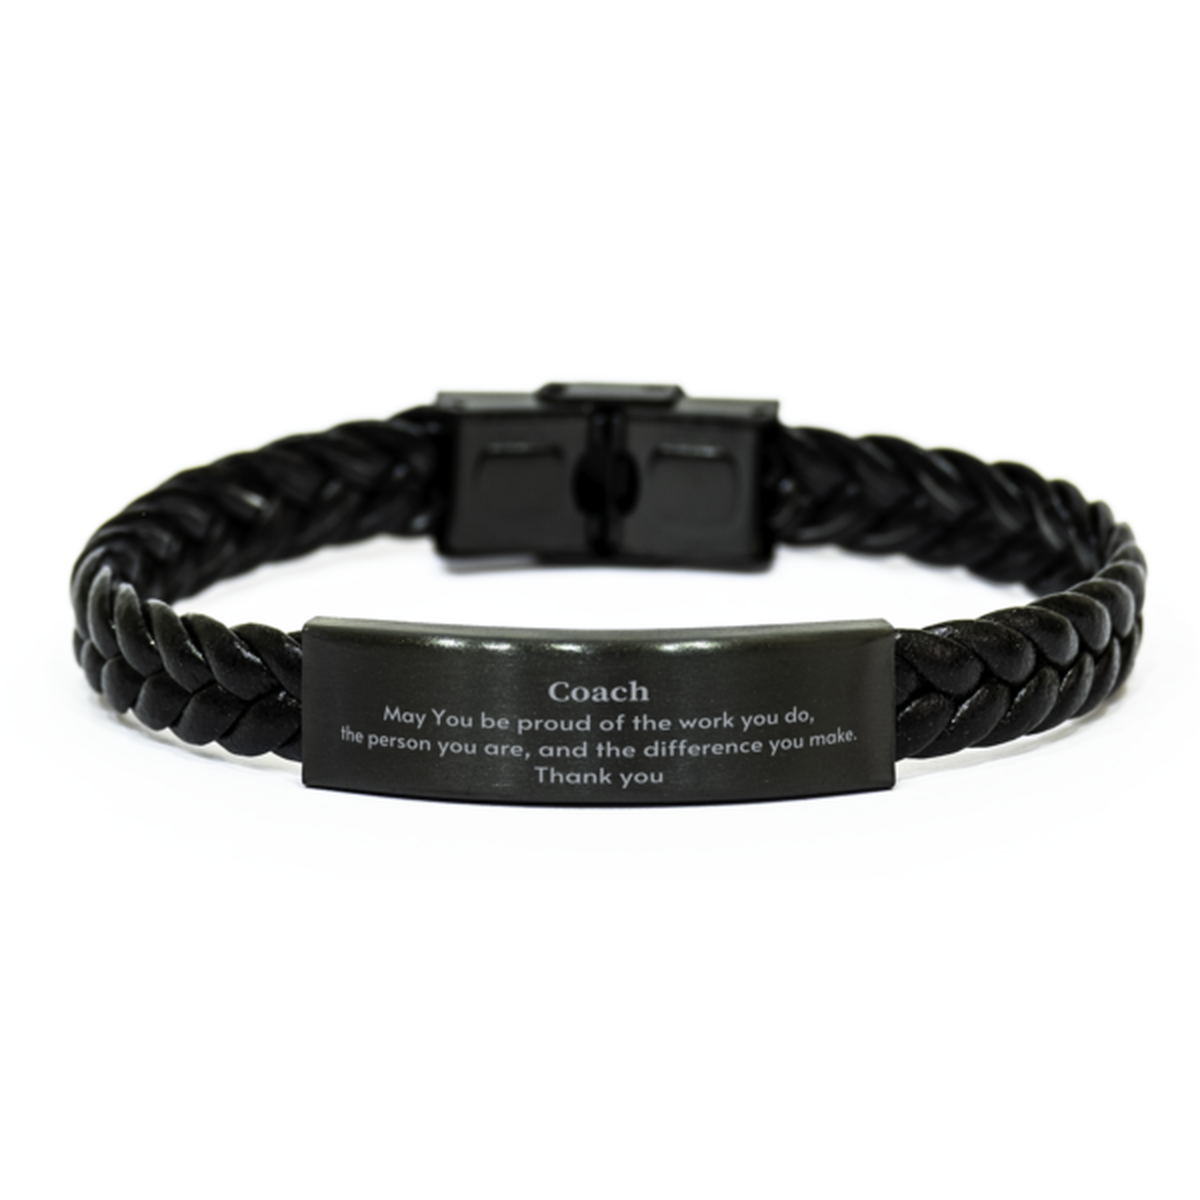 Heartwarming Braided Leather Bracelet Retirement Coworkers Gifts for Coach, Coach May You be proud of the work you do, the person you are Gifts for Boss Men Women Friends